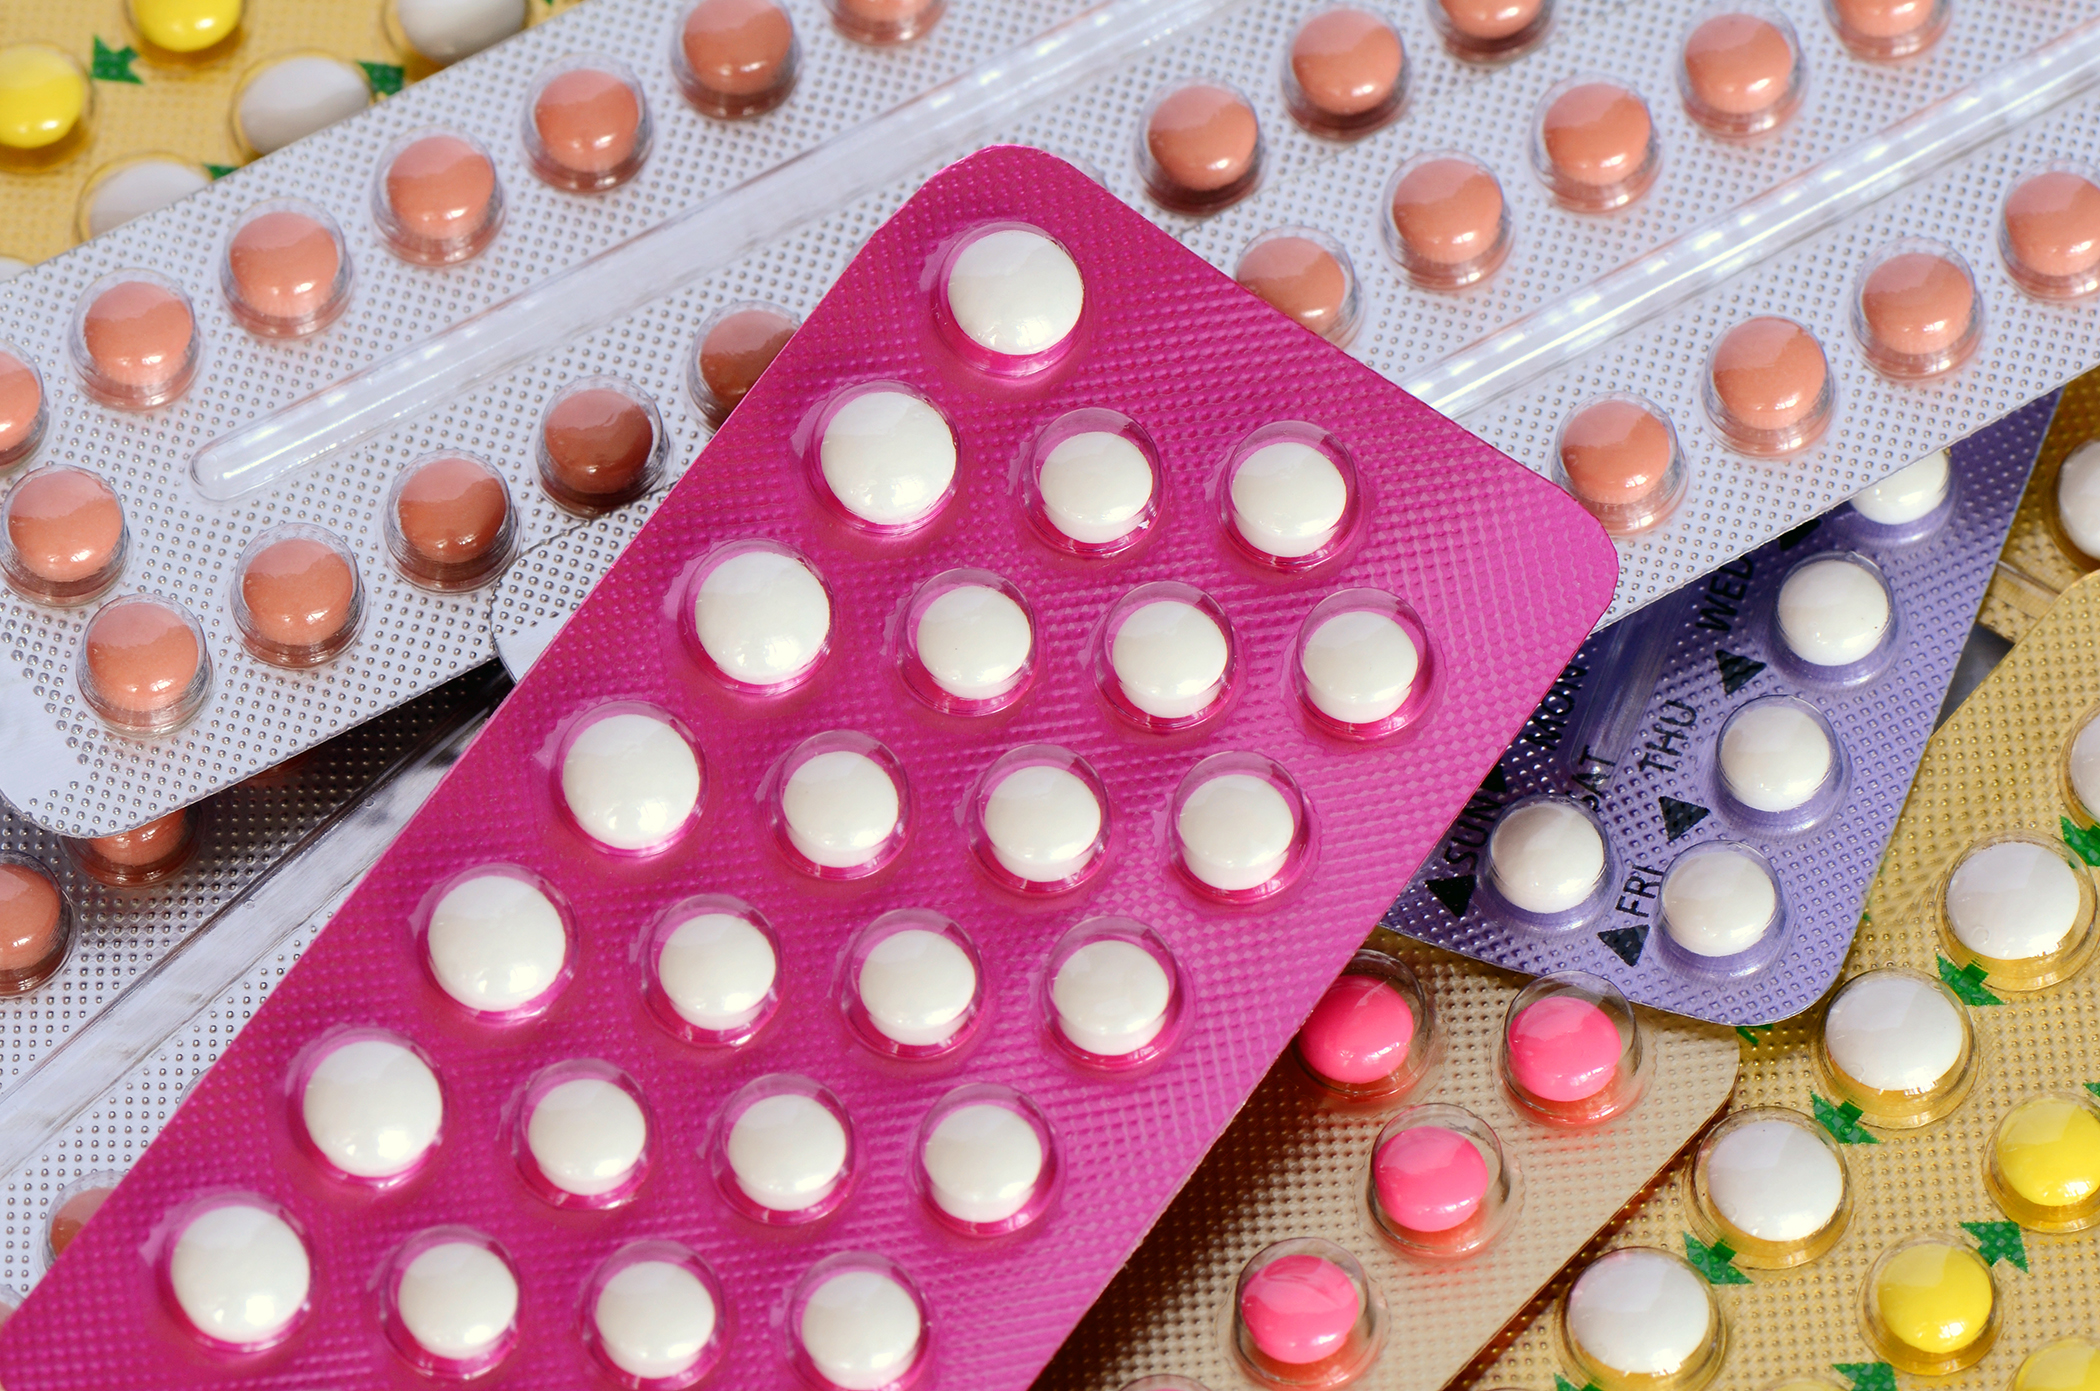 Colorful oral contraceptive pill both 21 and 28 tablets strips.